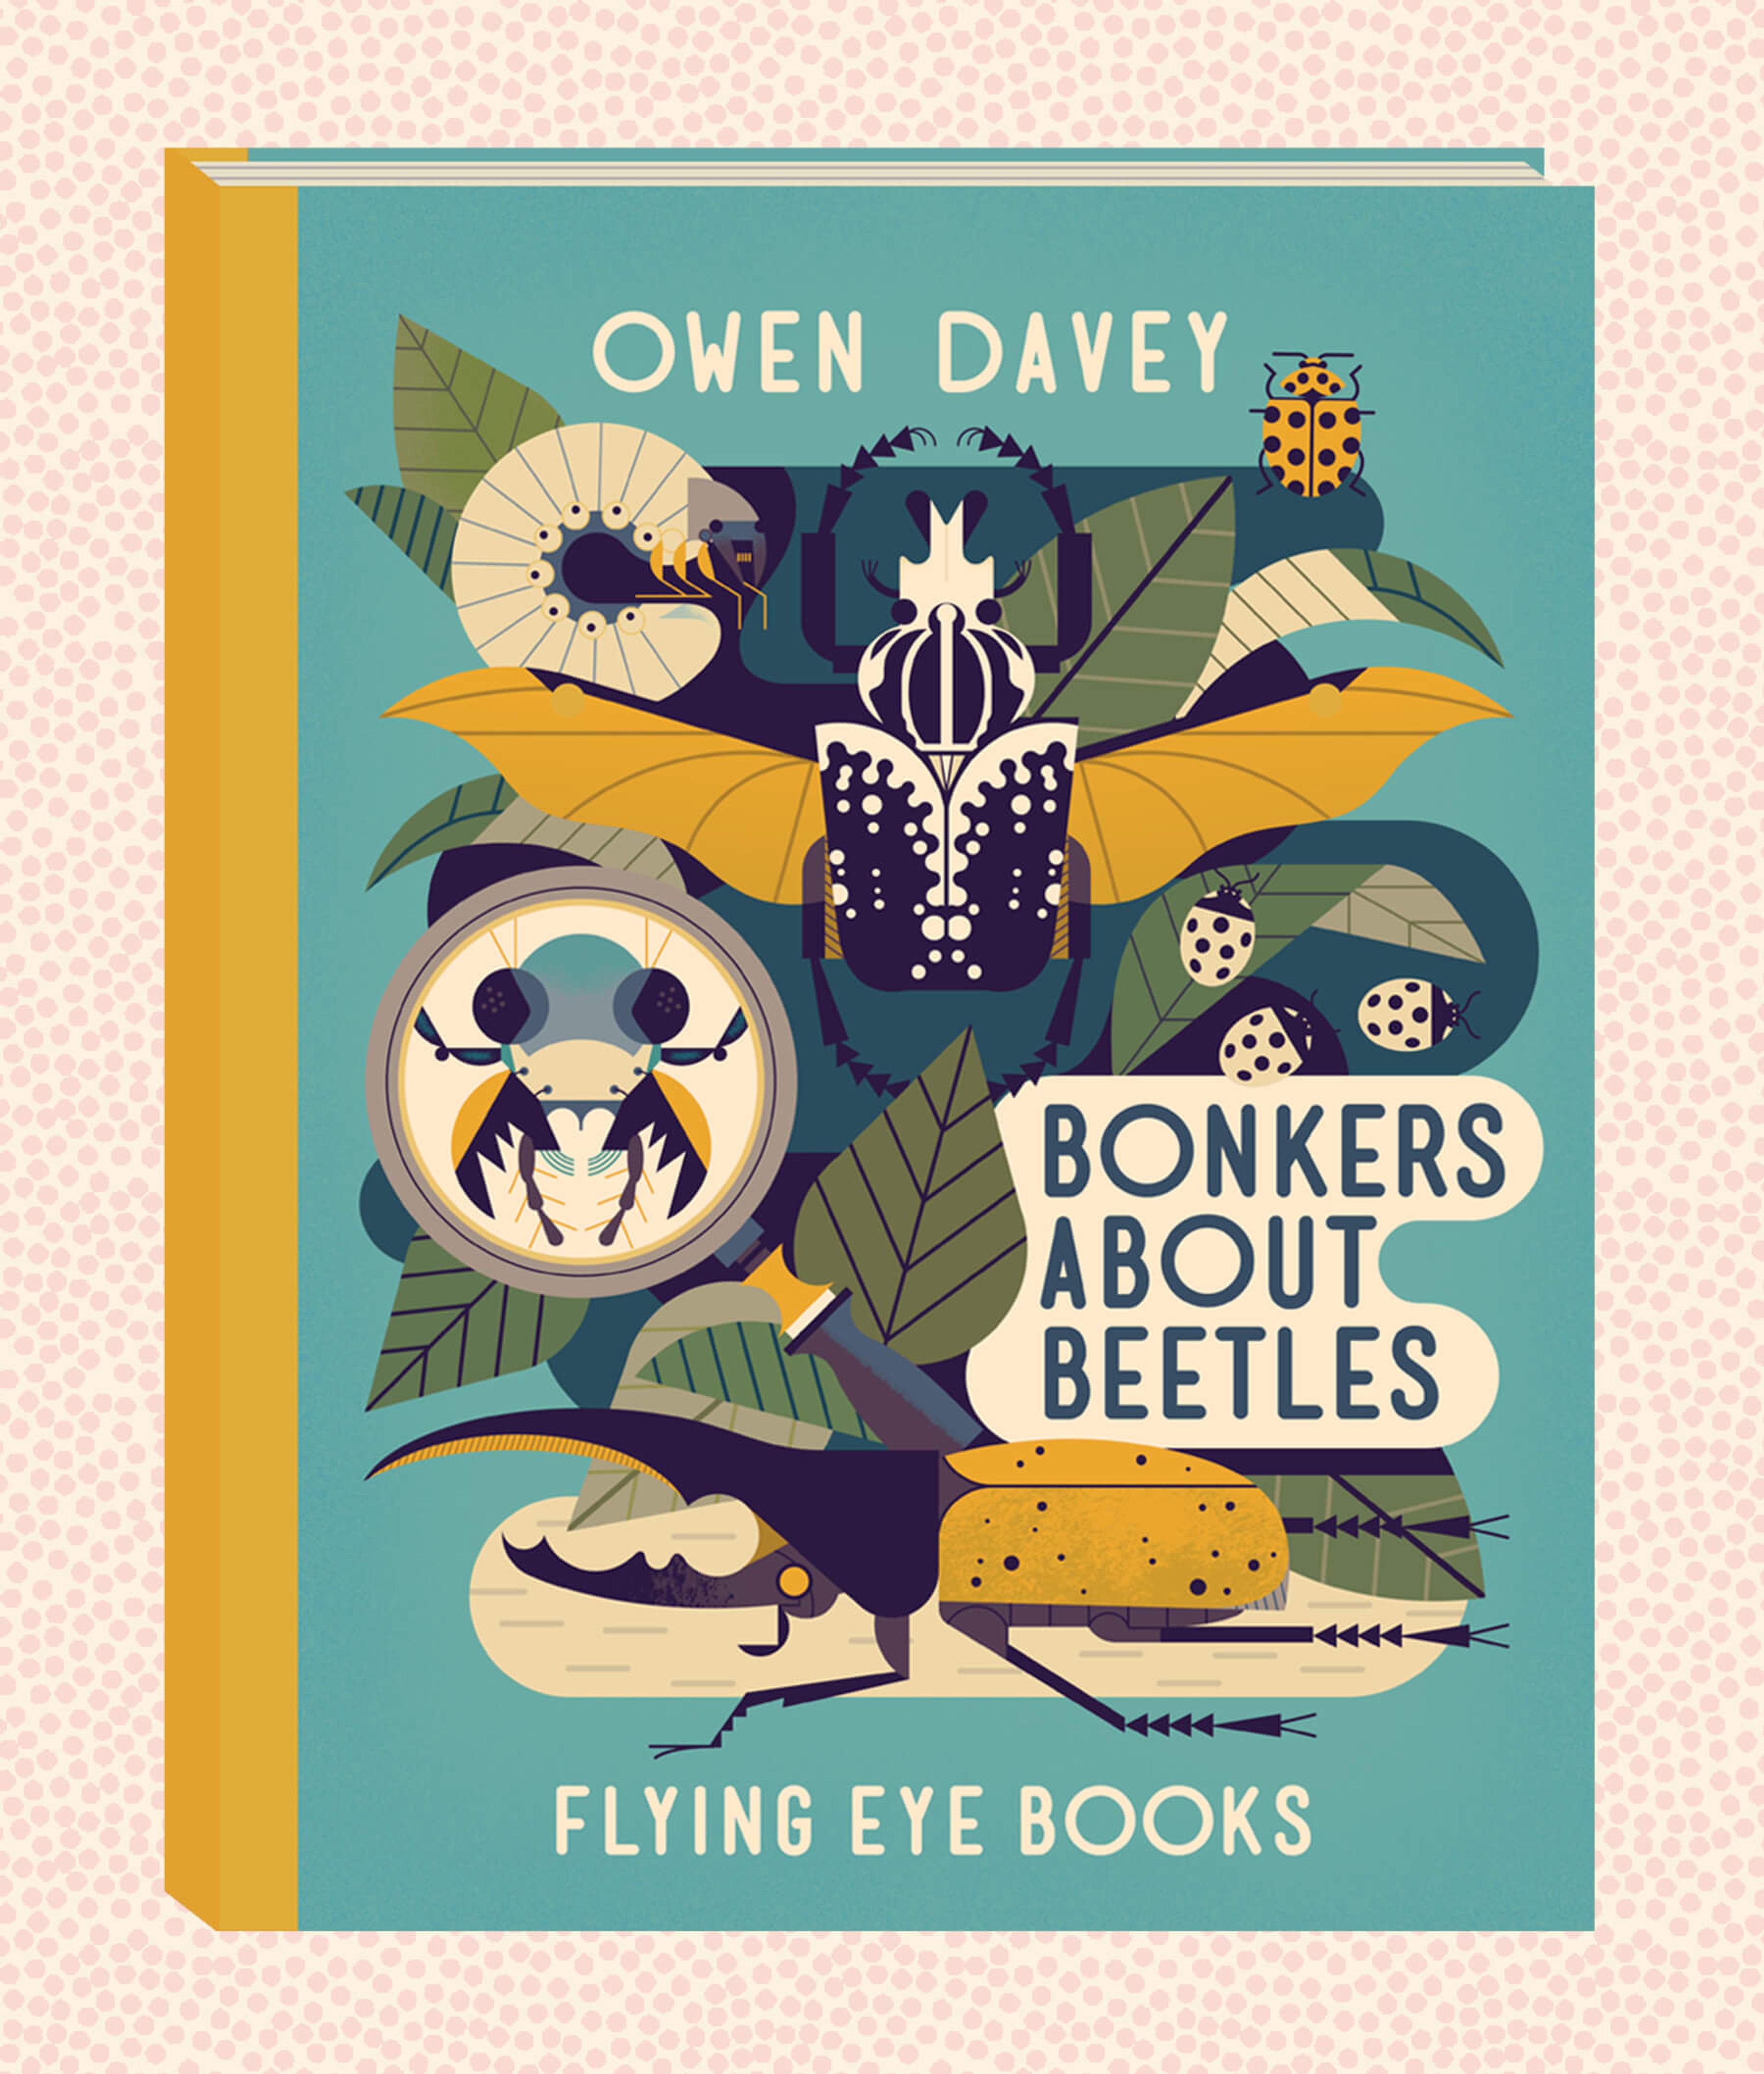 Illustration of the front cover of the book Bonkers About Beetles by Owen Davey.